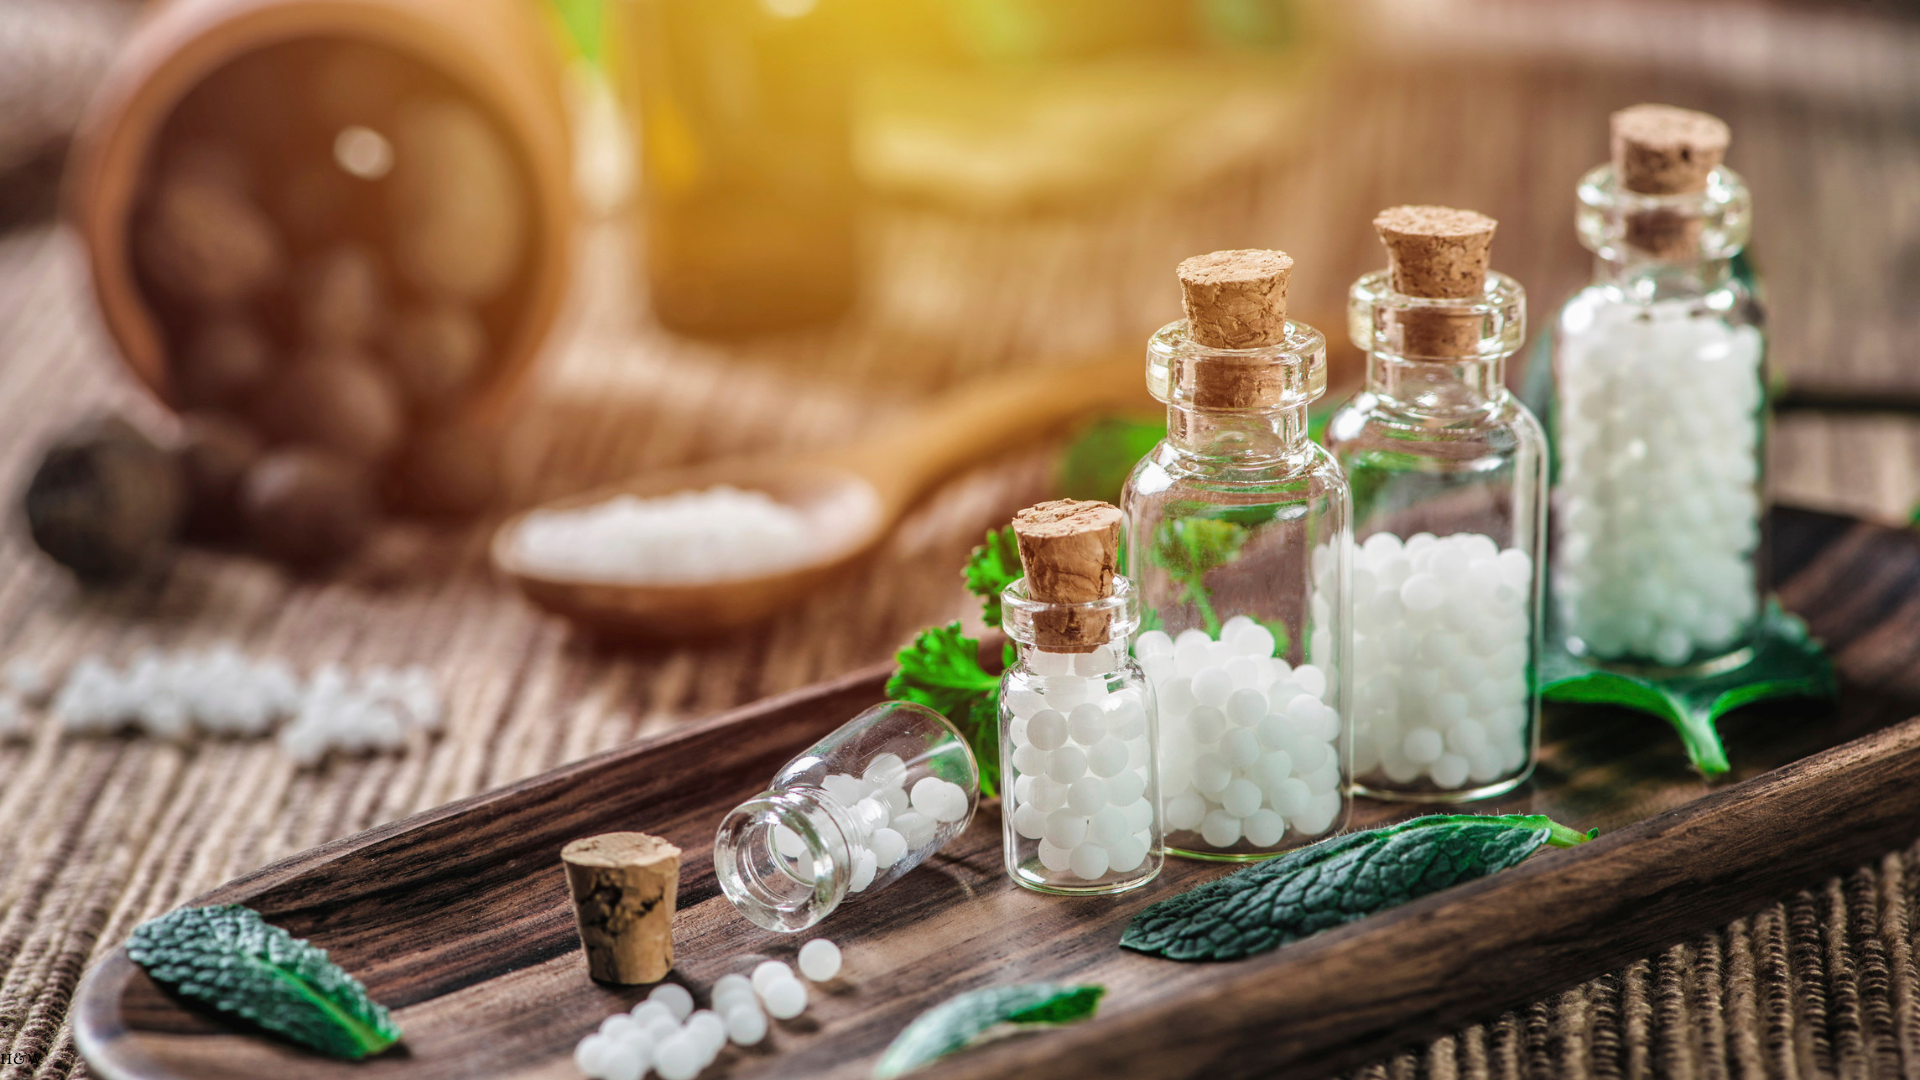 Homeopathy: Is it still relevant? By Donna Poppendieck of Health and Wellness Online.